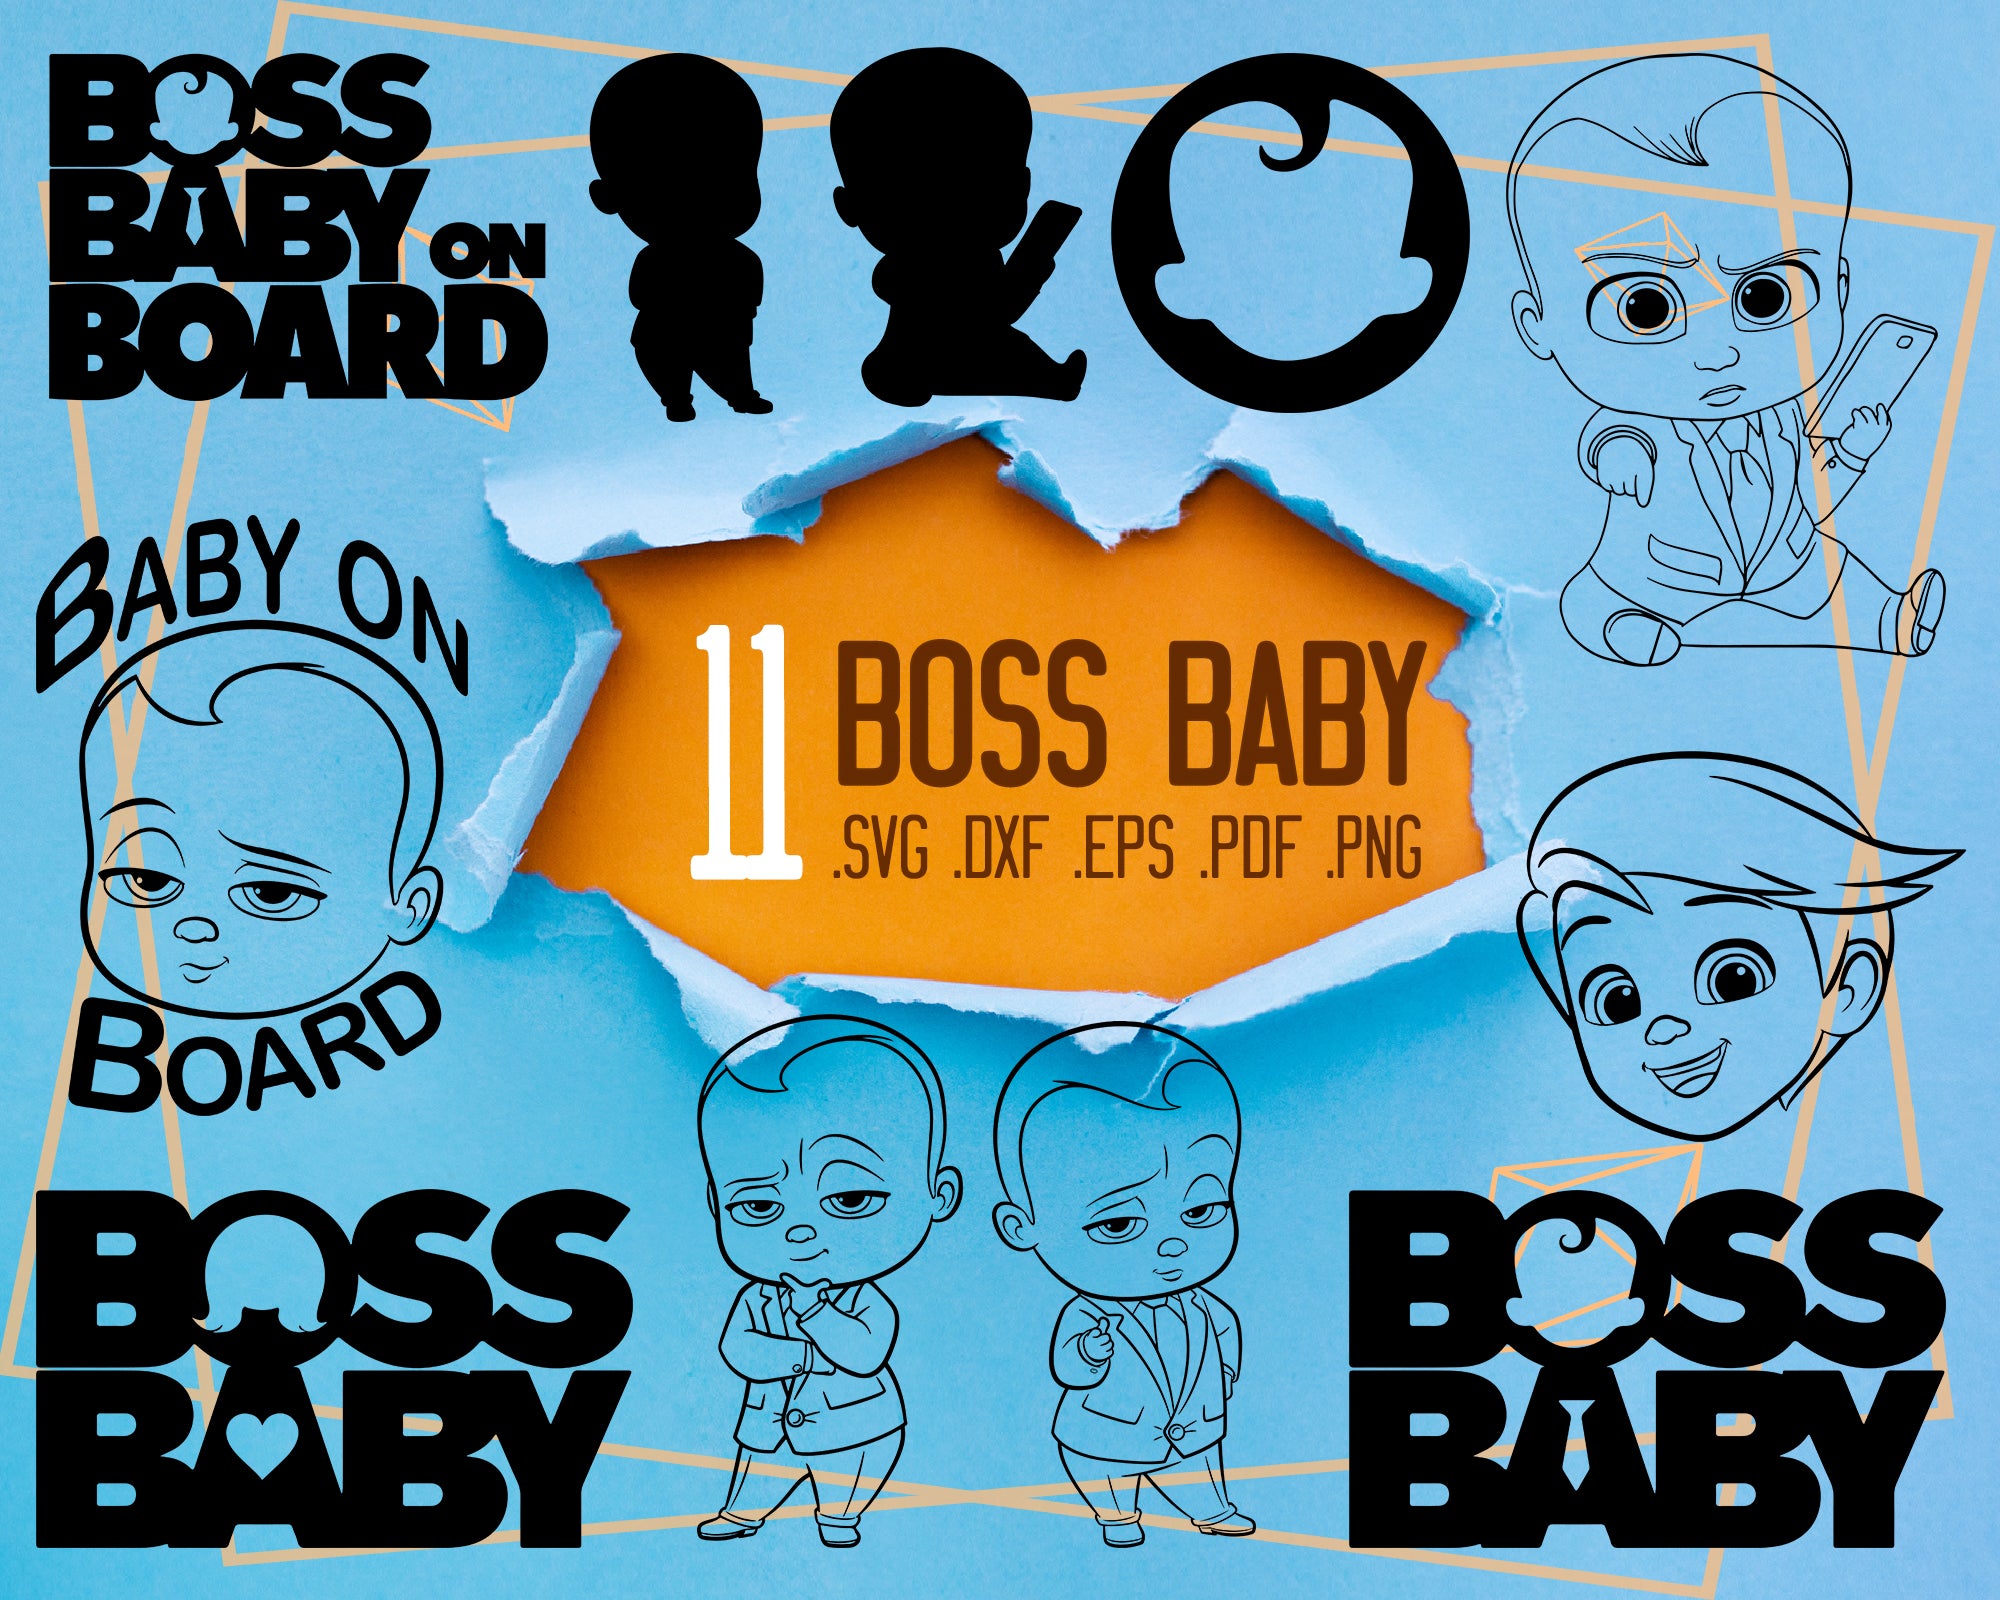 Download Boss Baby Svg Baby Boss Boy Boss Baby Svg African Girl Clipart Clipartic